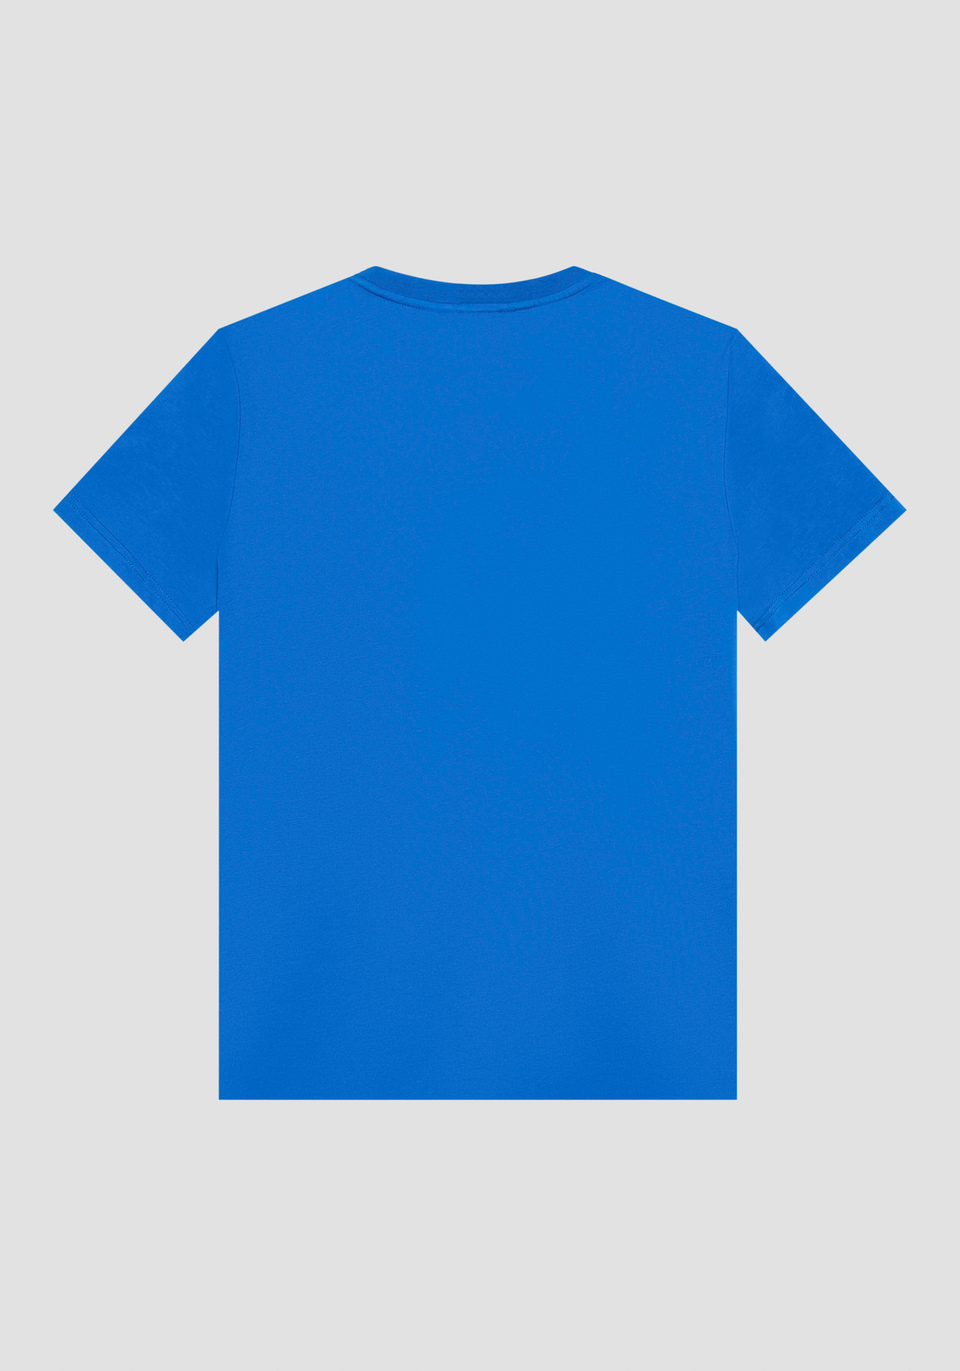 SLIM FIT T-SHIRT IN COTTON WITH LOGO PATCH - Antony Morato Online Shop